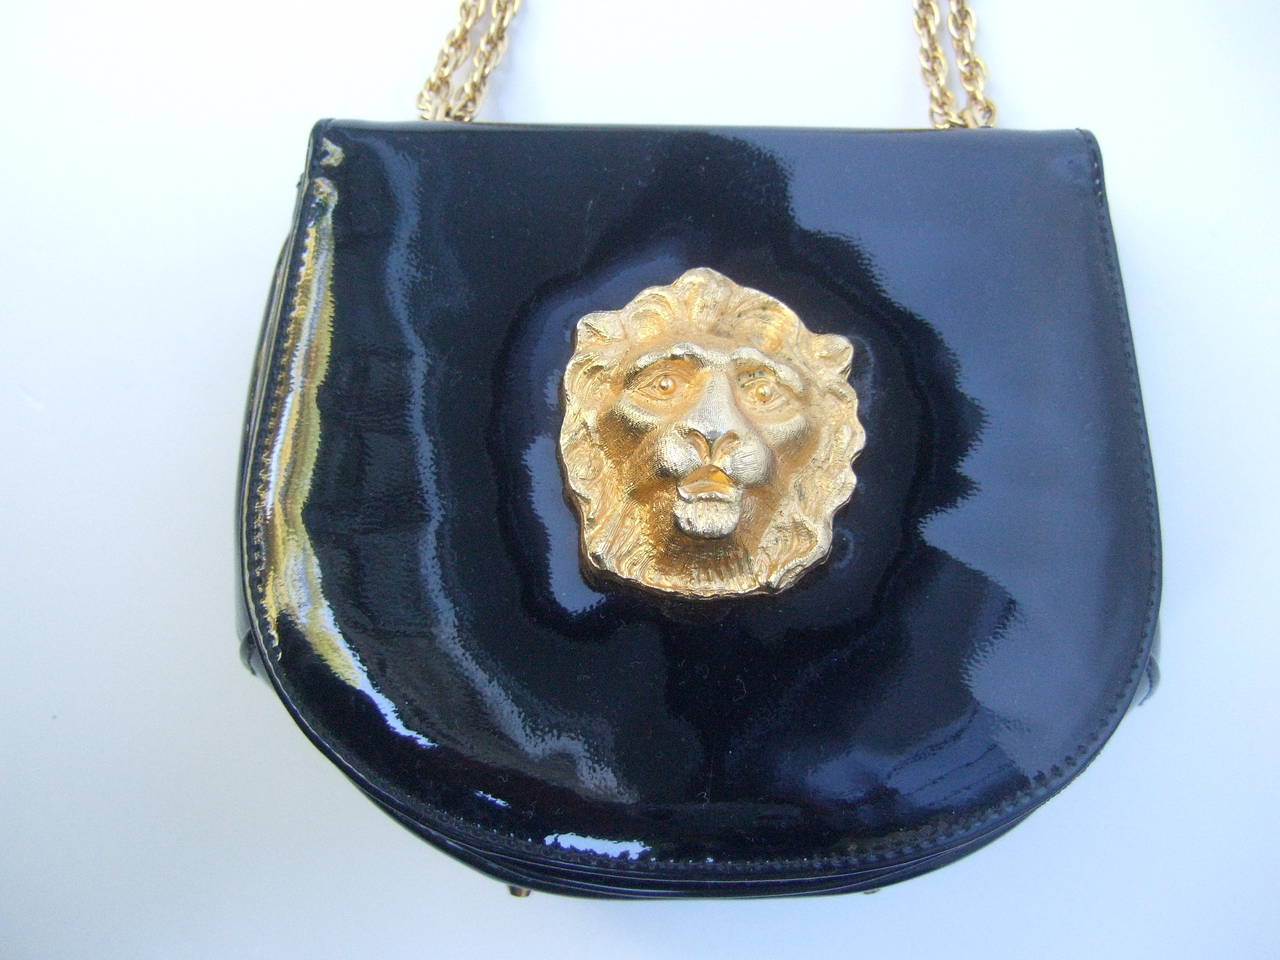 Saks Fifth Avenue Black patent leather diminutive handbag c 1970
The stylish retro handbag is adorned with a gilt metal lion emblem
The compact patent leather handbag is carried with dual gilt metal
chain straps

The interior is lined in black